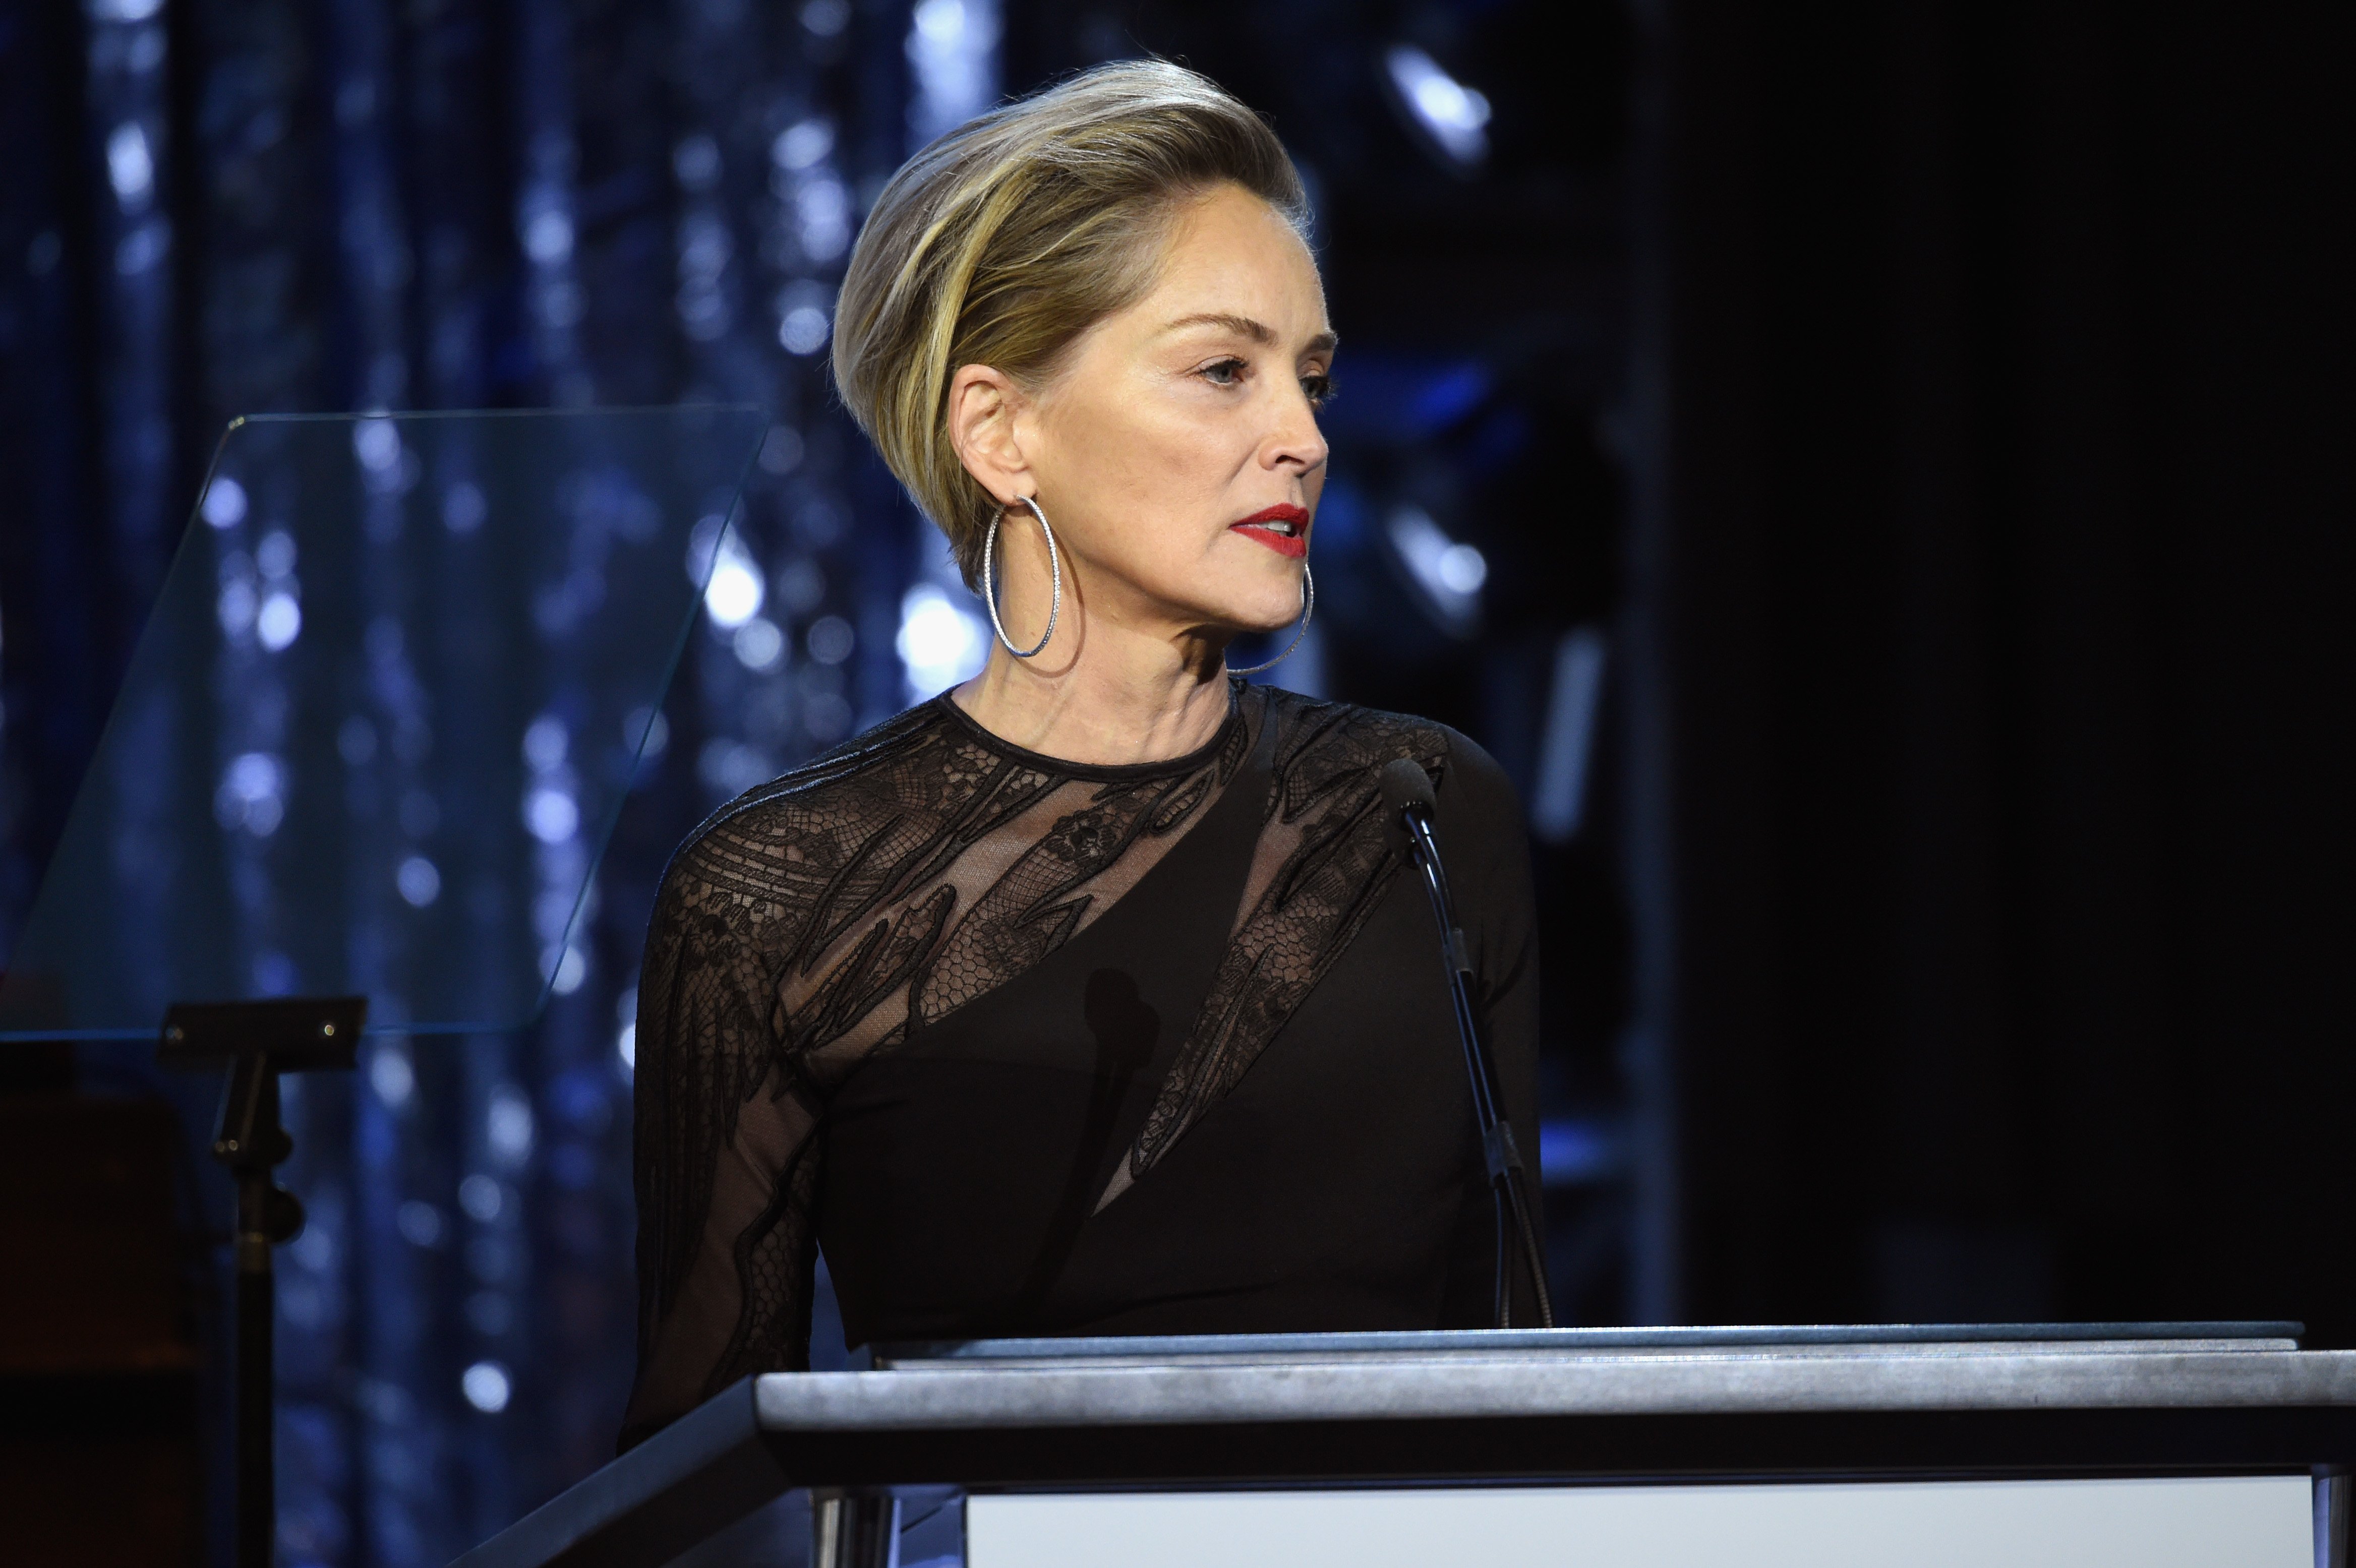 Actress Sharon Stone speaks onstage on the 25th Annual Elton John AIDS Foundation's Academy Awards Viewing Party at The City of West Hollywood Park on February 26, 2017 in West Hollywood, California | Photo: Getty Images